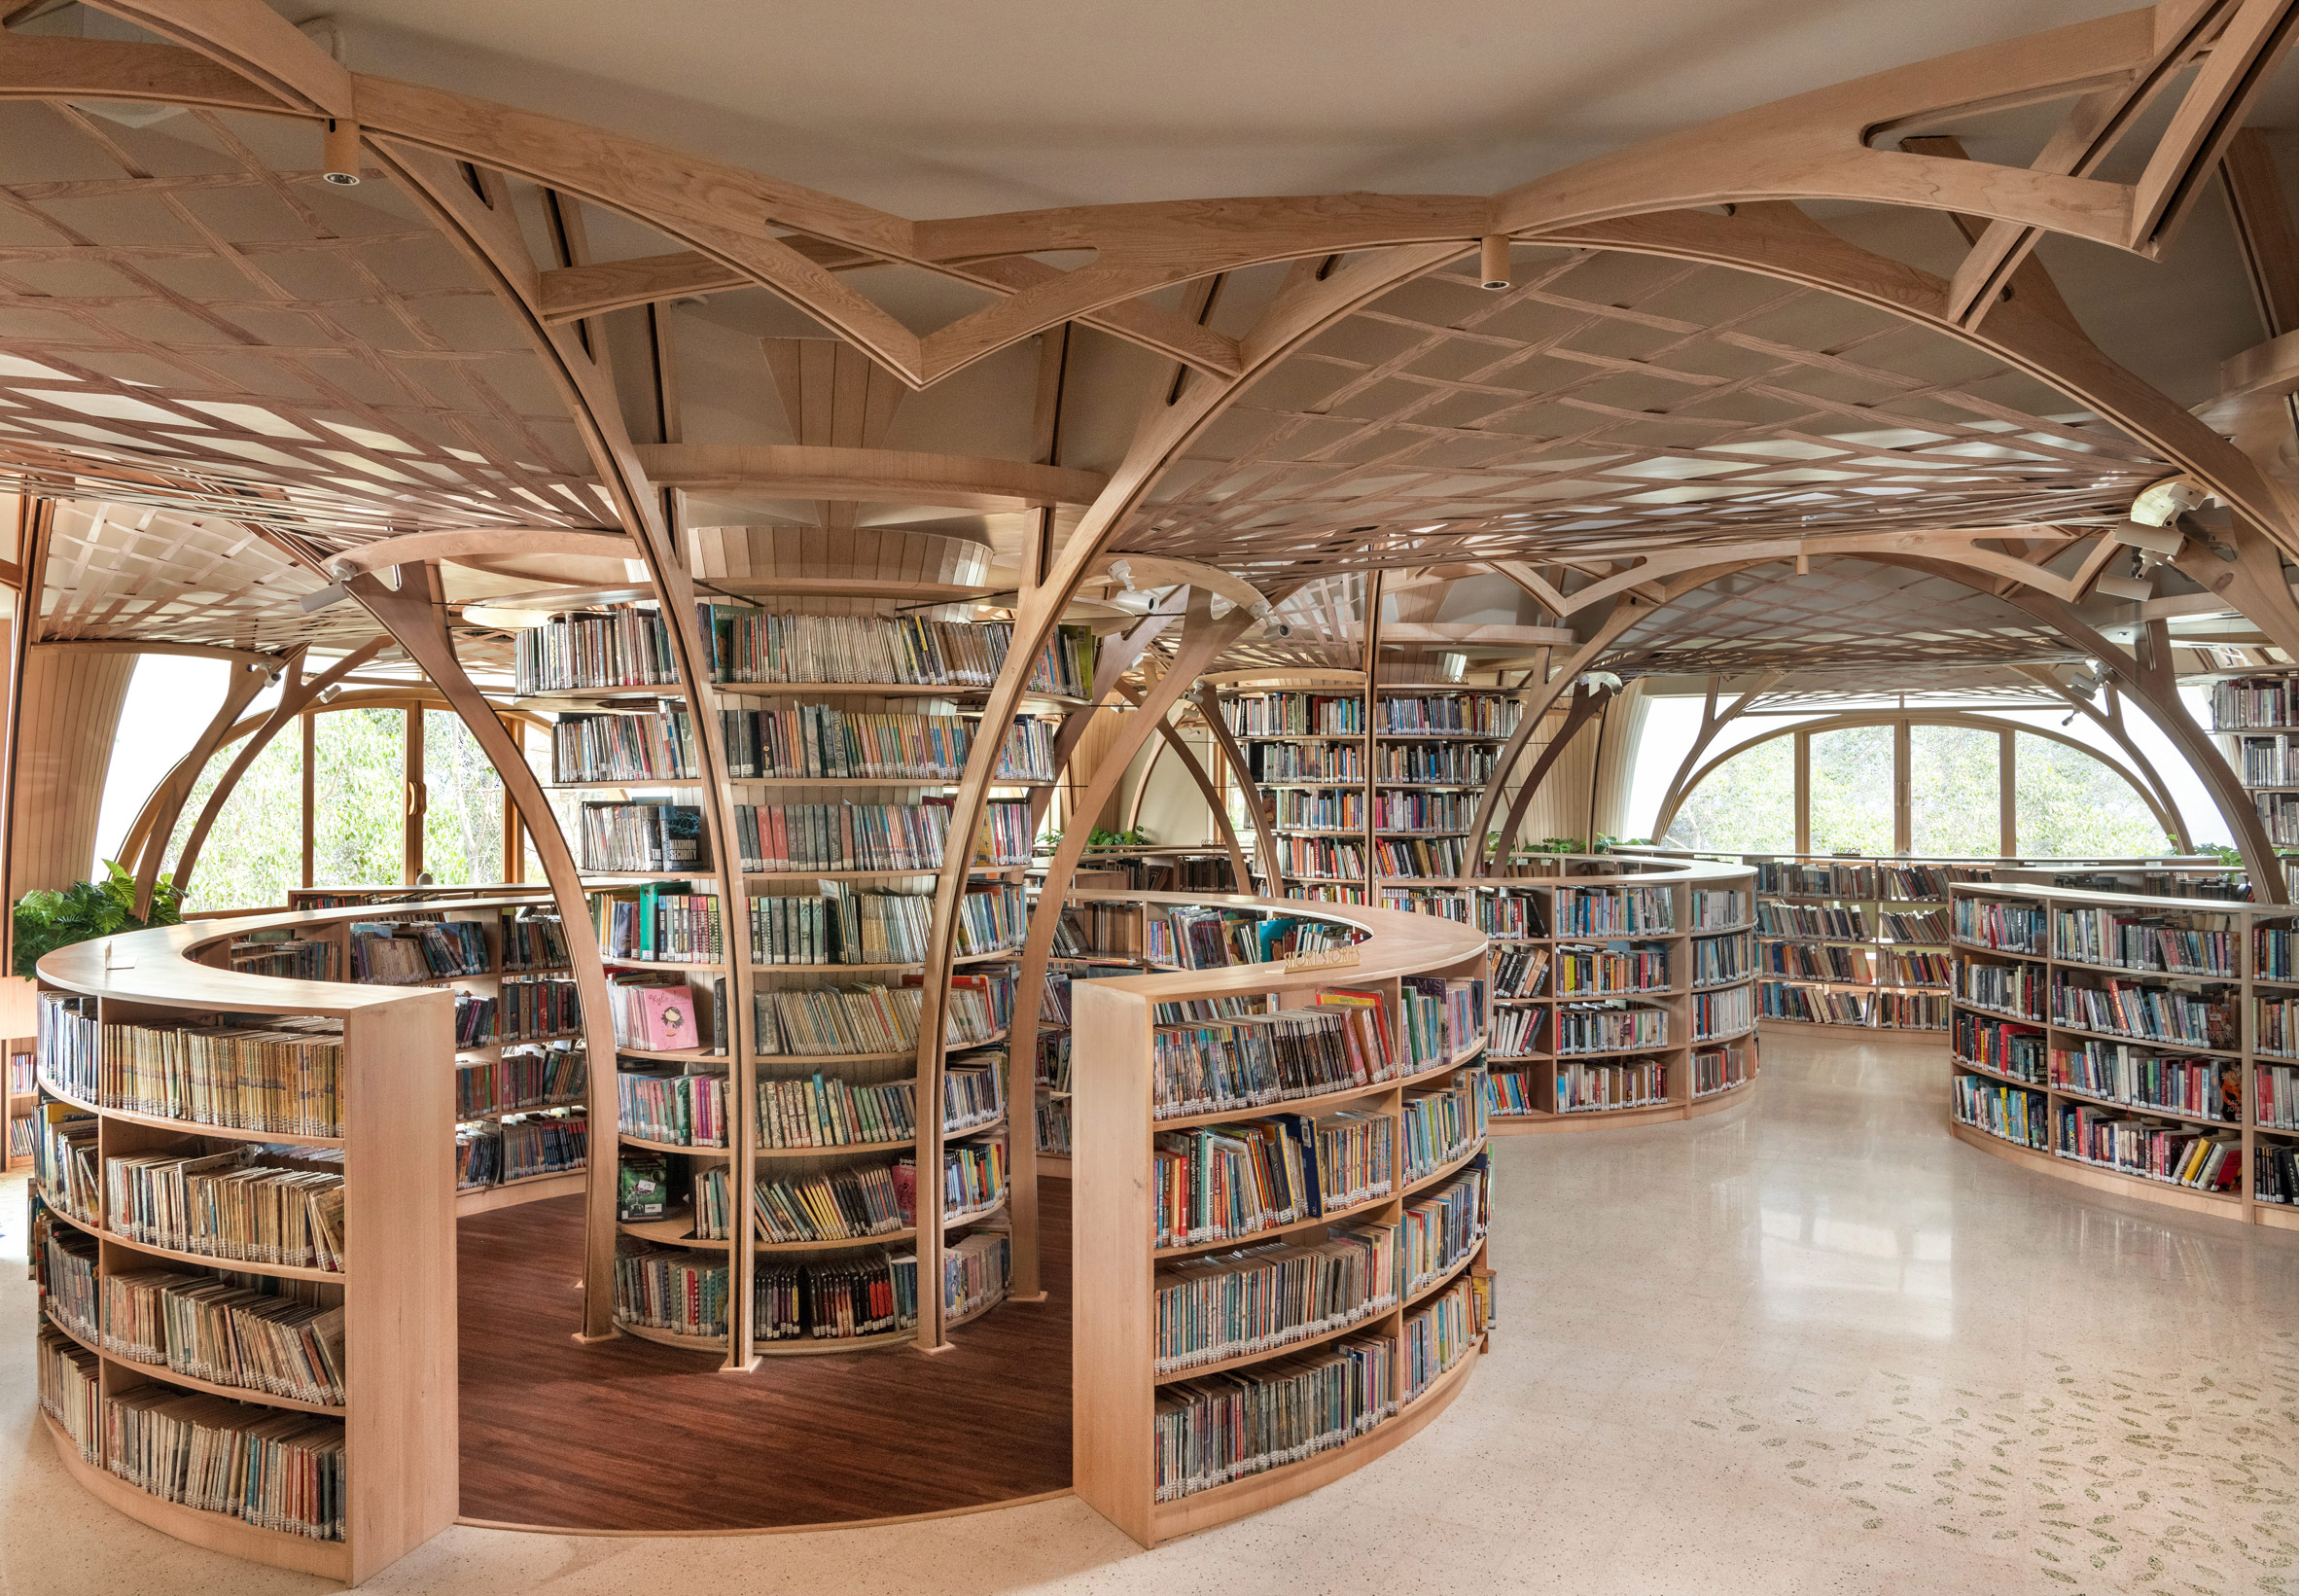 Library interior in India